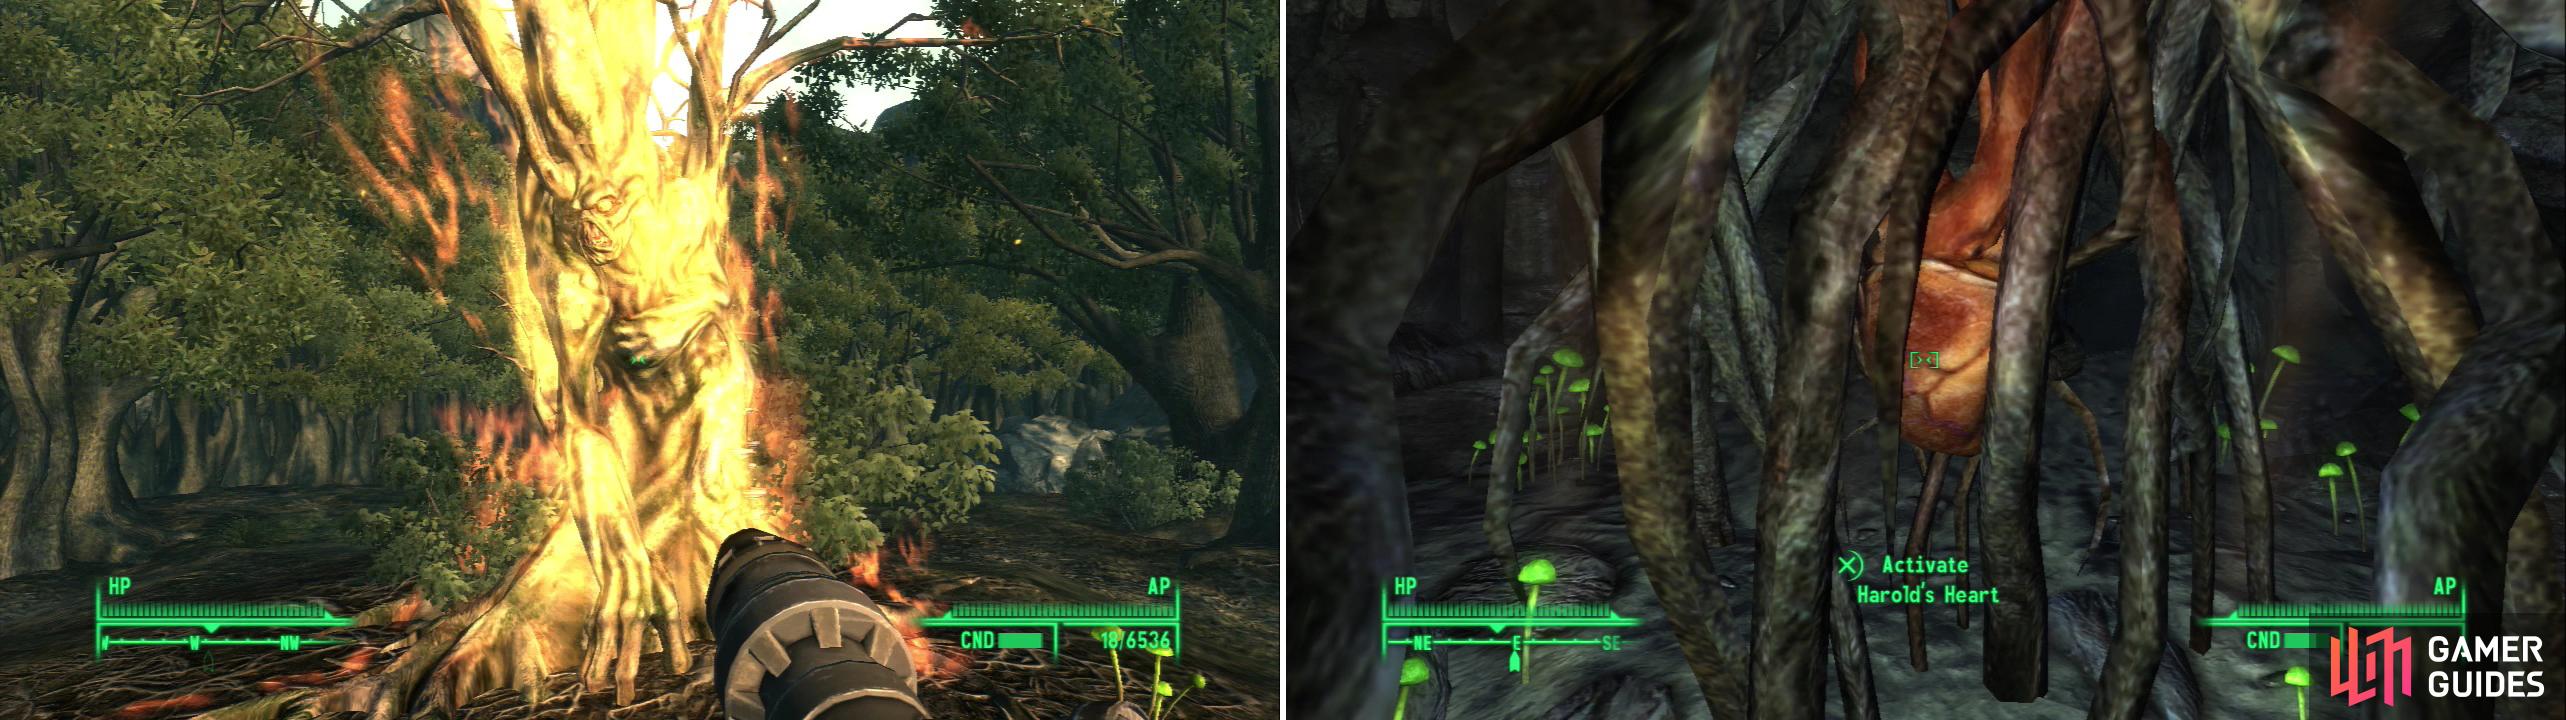 Either give Harold his release in a manner most befitting a talking piece of wood (left), or venture into the abandoned mines under Oasis to find his heart (right).